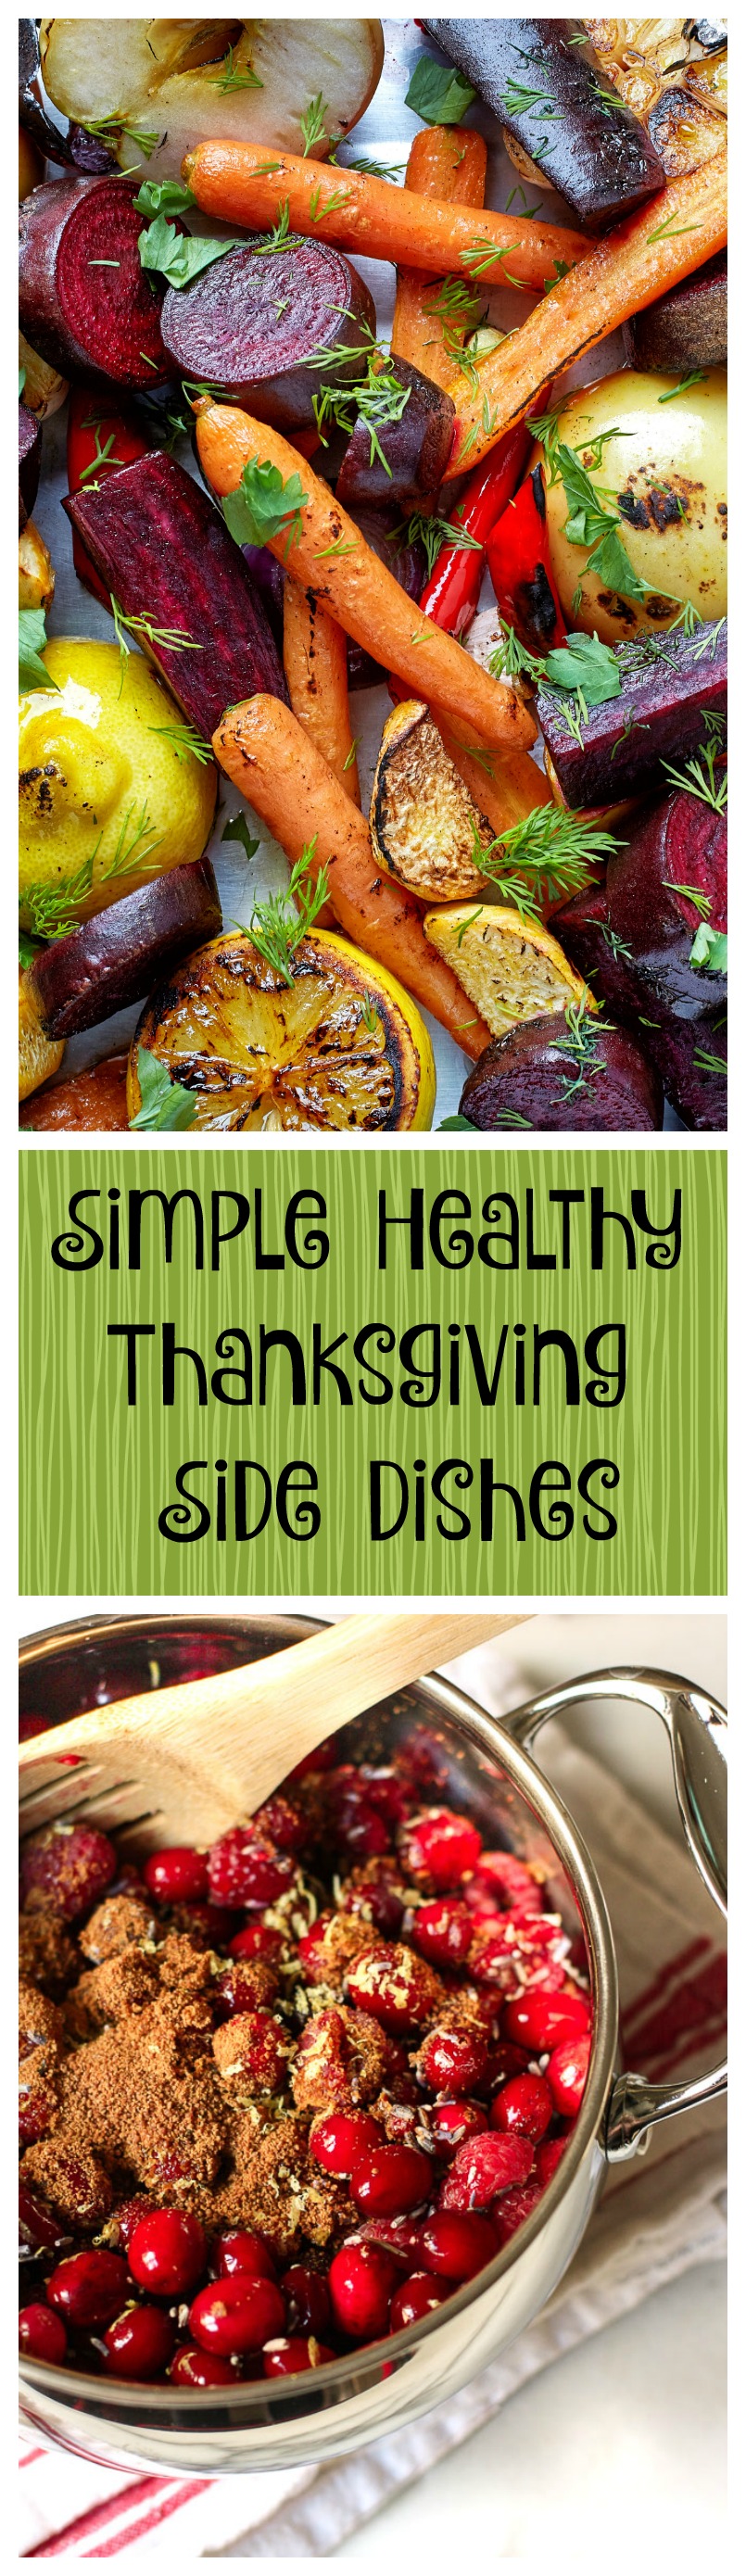 simple healthy Thanksgiving side dishes